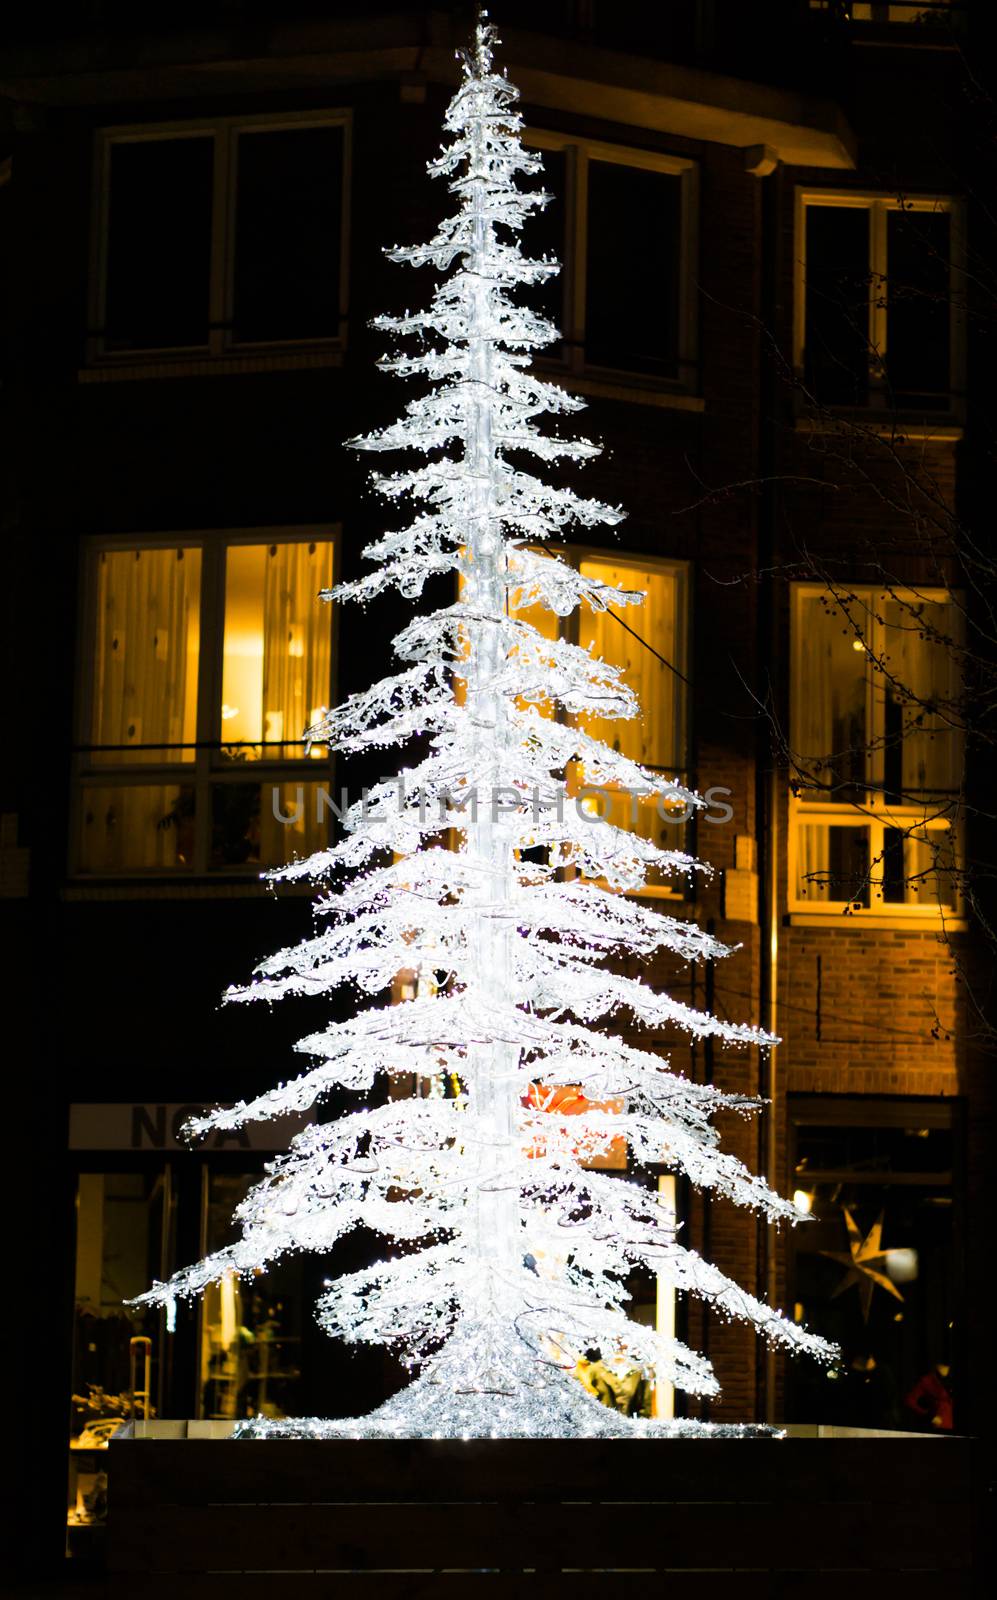 lighted up christmas tree decoration in the city streets at night by charlottebleijenberg